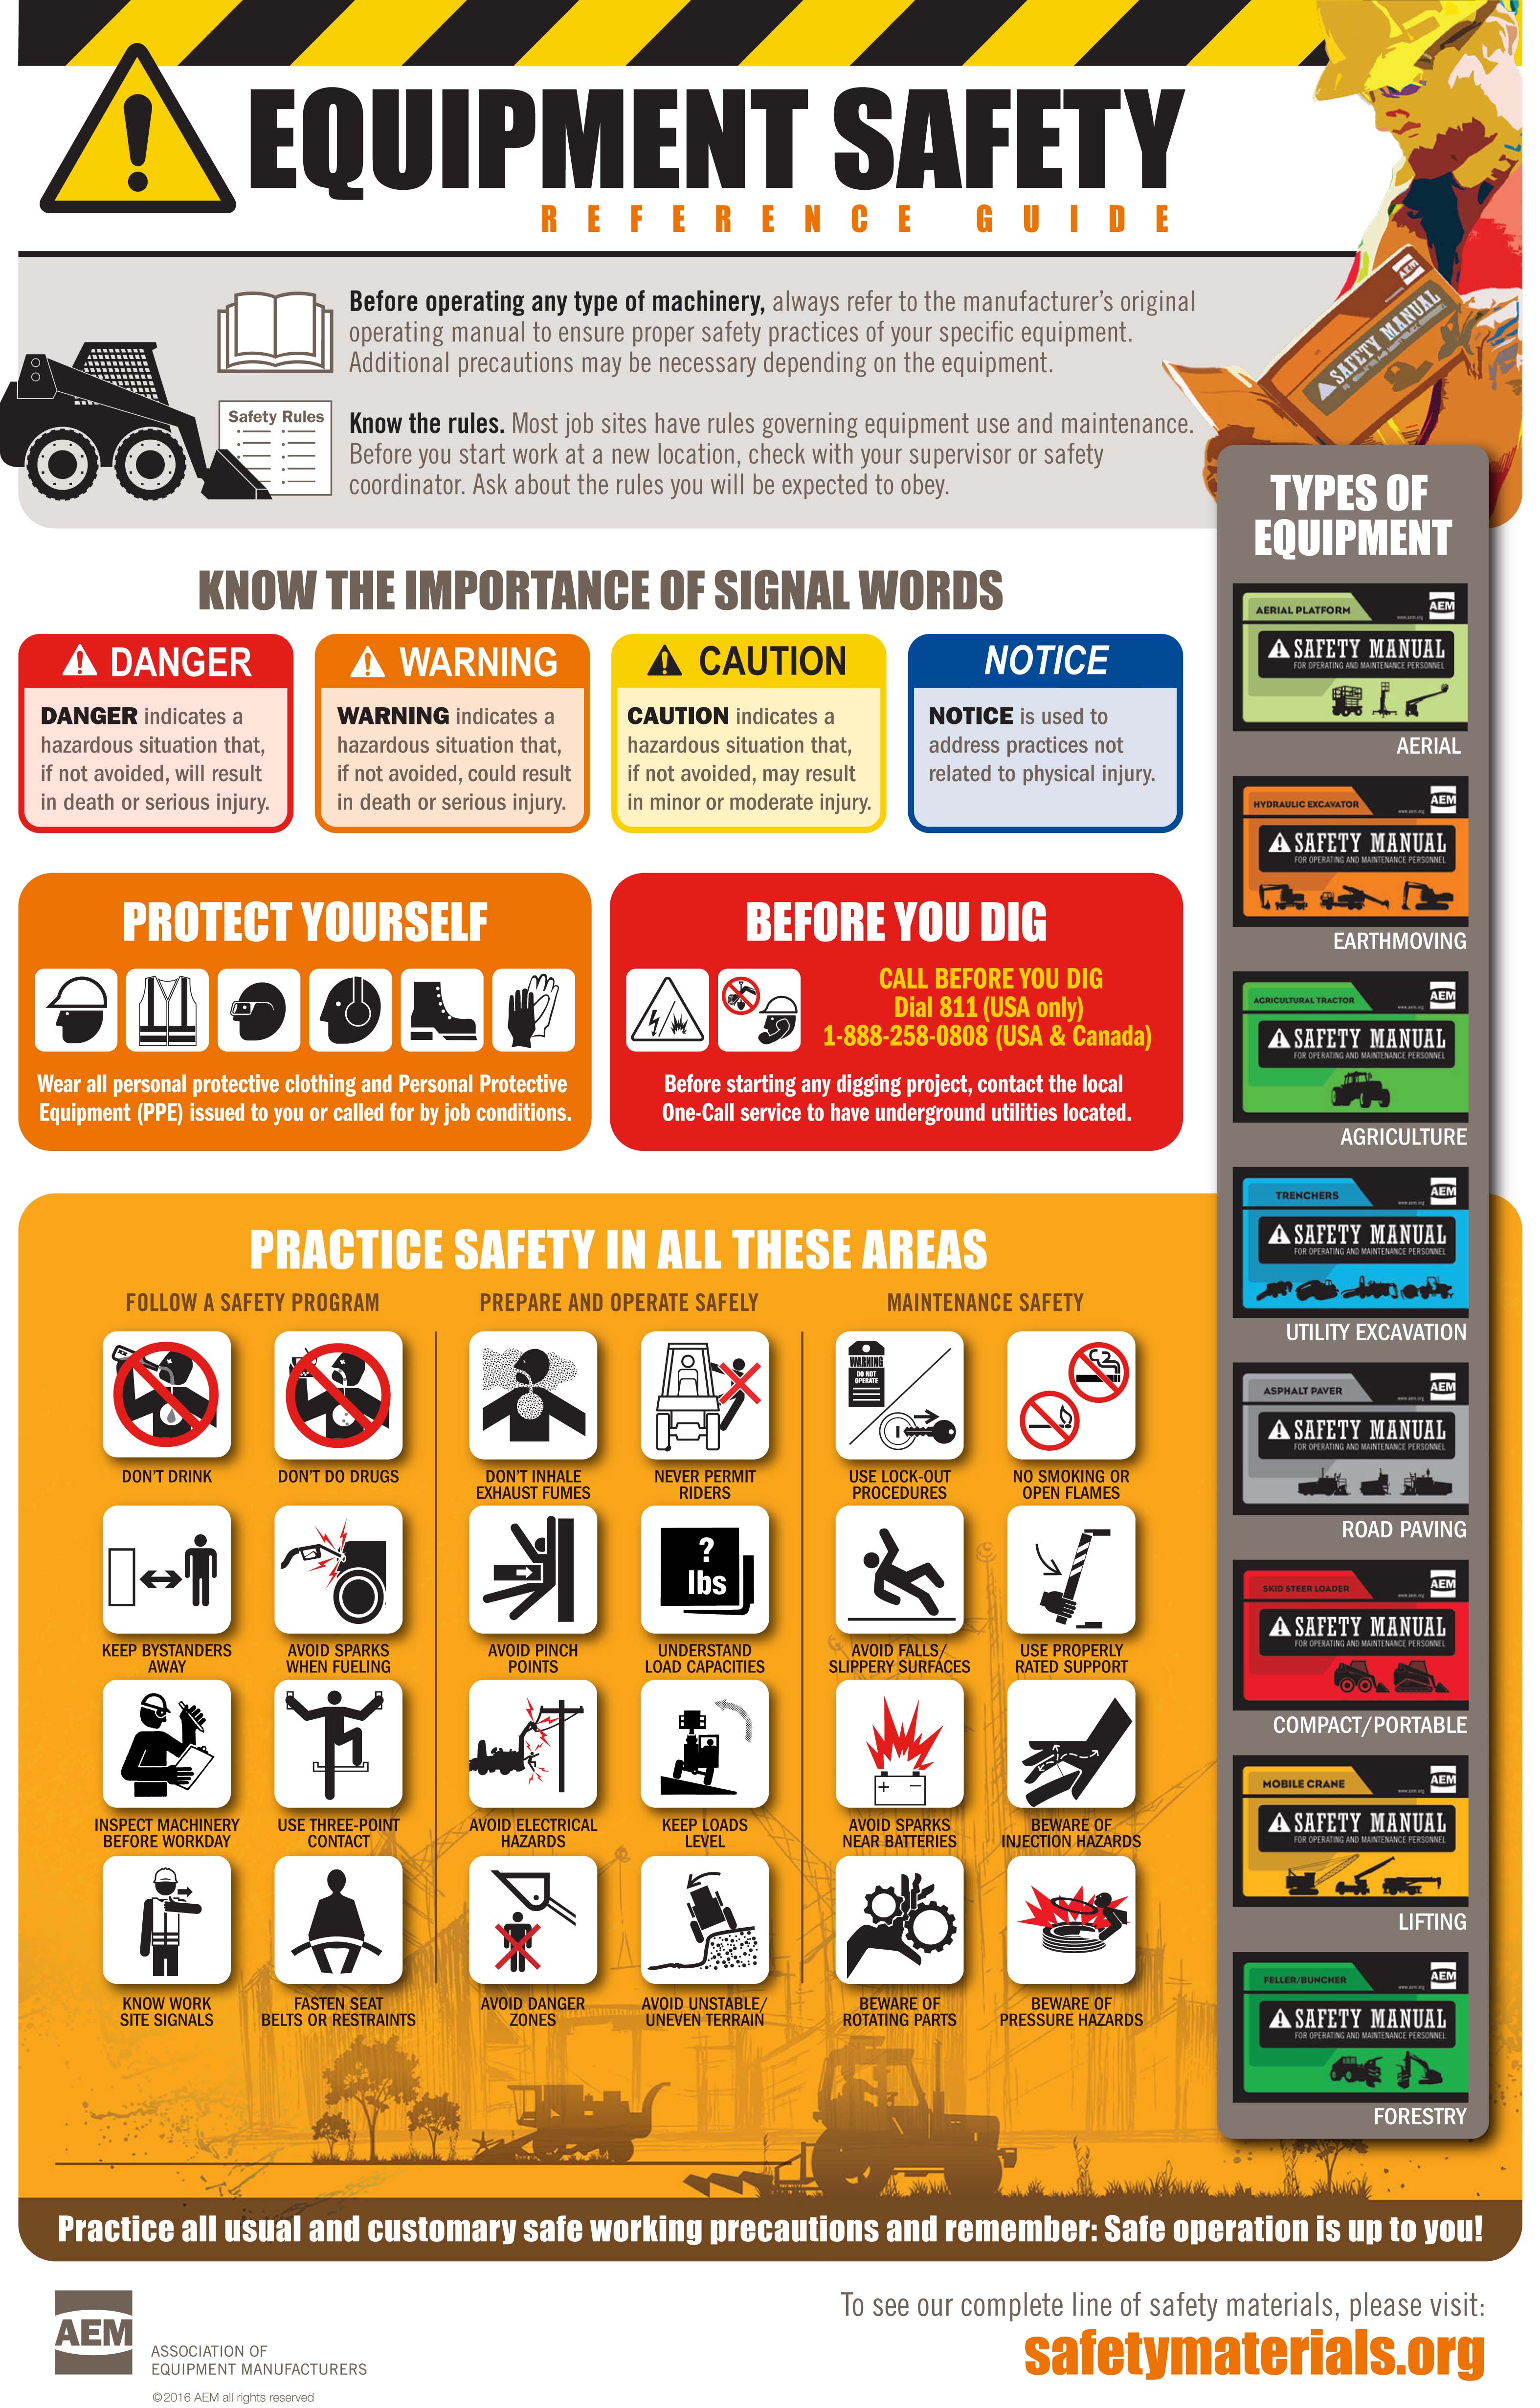 The AEM’s Equipment Safety Infographic